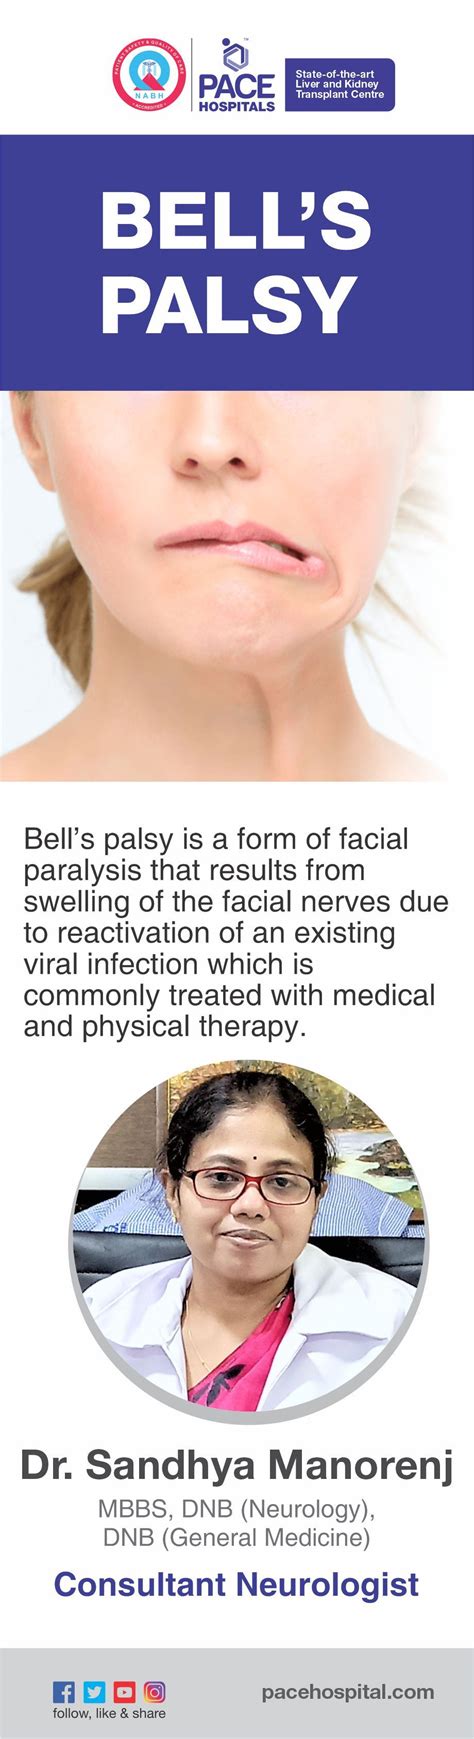 Know About Bells Palsy Facial Paralysis In 2021 Facial Nerve